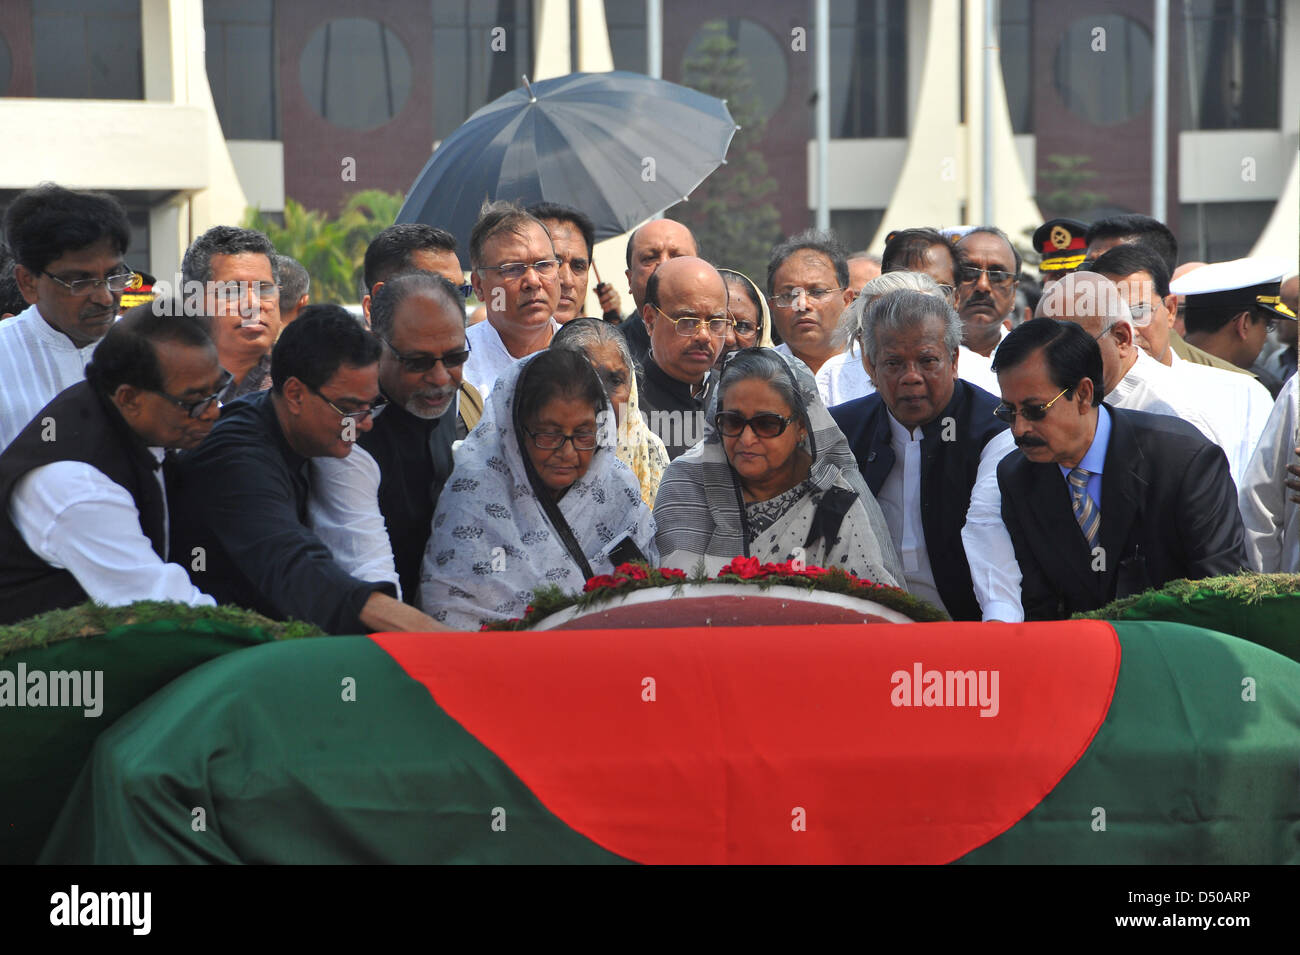 Bangladesh's Prime Minister Sheikh Hasina (C) lays a wreath on the coffin of Bangladesh's president Md. Zillur Rahman after the arrival of the coffin from Singapore at the airport in Dhaka, Bangladesh, 21 March 2013. Rahman died 20 March at age 84 in hospital in Singapore, where he had been undergoing treatment for respiratory problems, the presidential palace said. The government declared three days of mourning for Rahman, who had been active in politics for more than six decades. Stock Photo